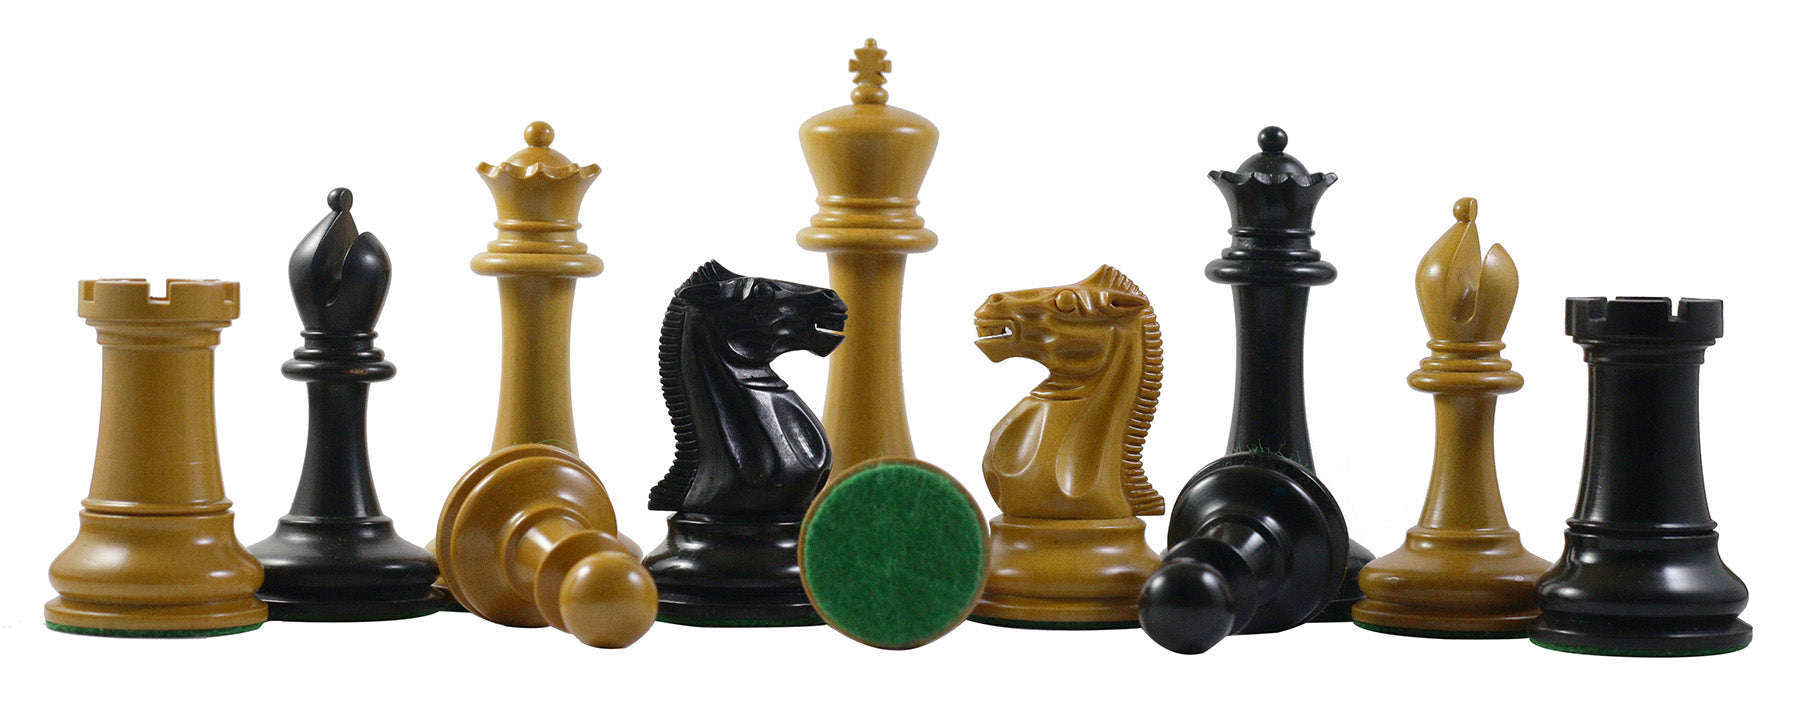 chessqueen #chesspieces #chessking #chessmoves #game #chessstory